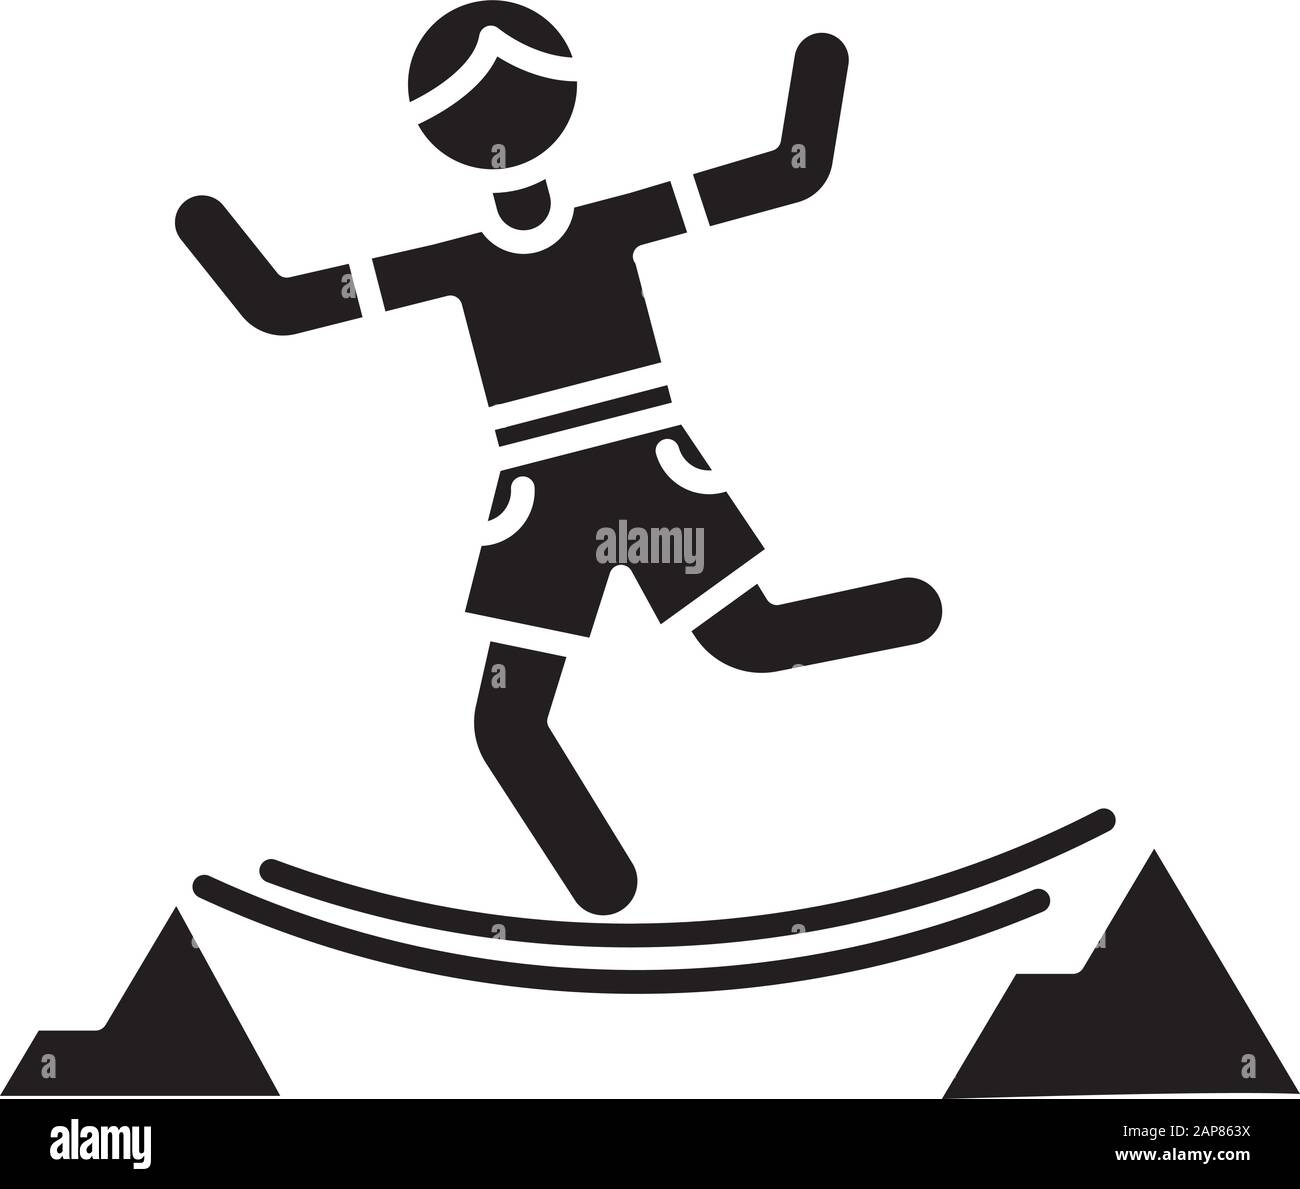 Highlining glyph icon. Slacklining. Walking and balancing on tightrope. Slackliner in mountains. Extreme sport stunt. Walker on rope. Silhouette symbo Stock Vector